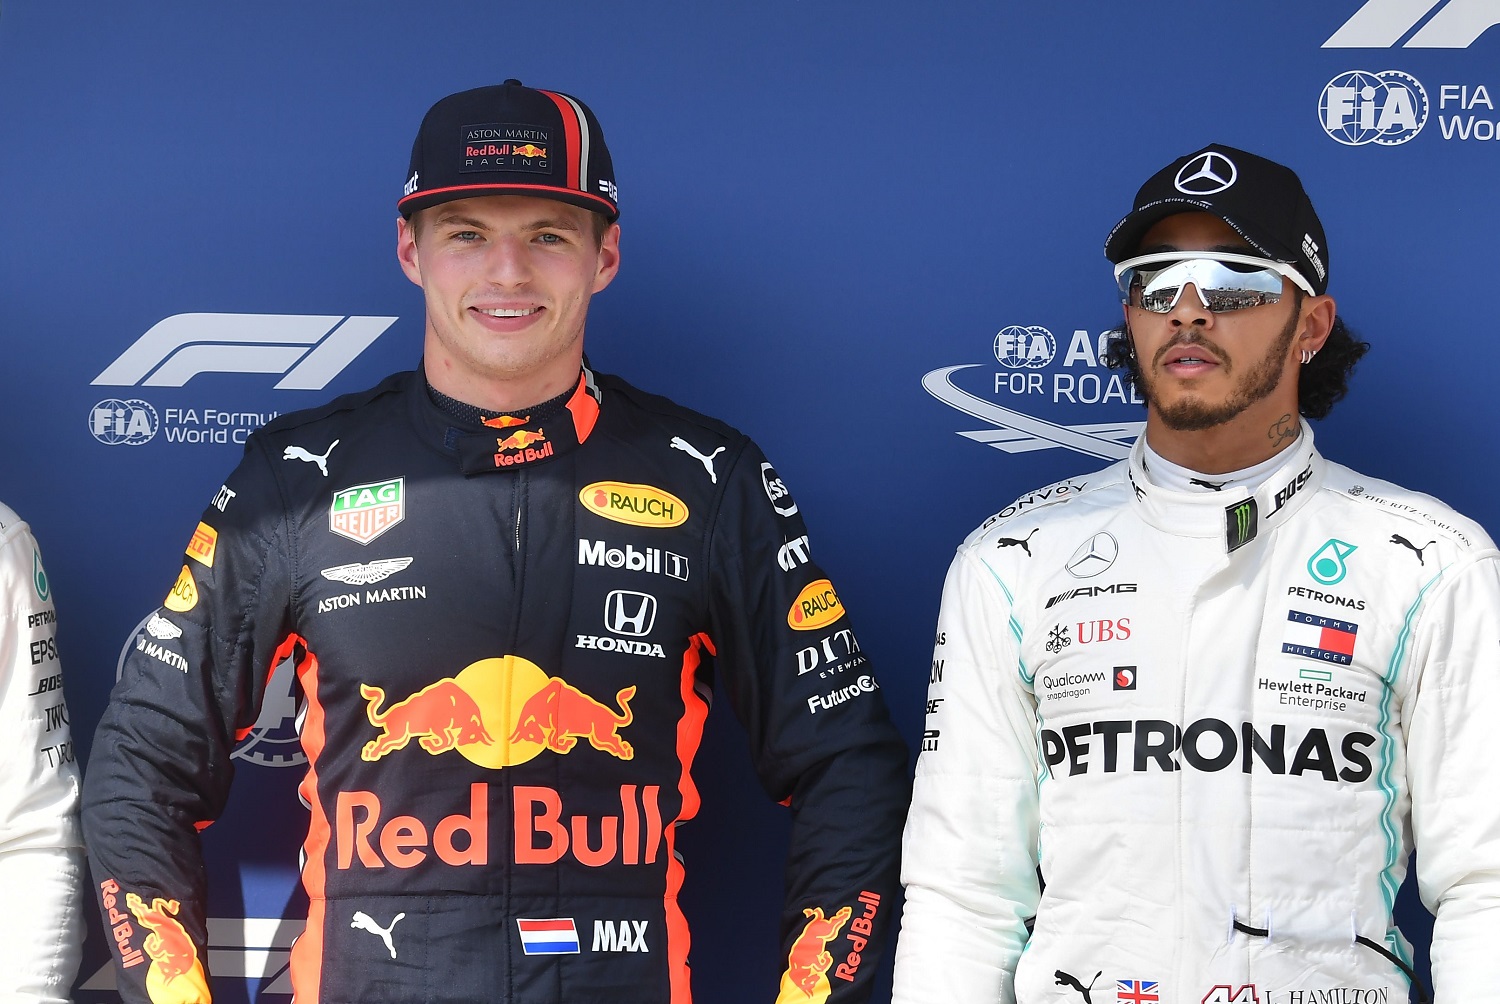 Red Bull's 0M0ax Verstappen and Mercedes' Lewis Hamilton pose after the qualifying session of the Formula 1 Hungarian Grand Prix on Aug. 3, 2019.